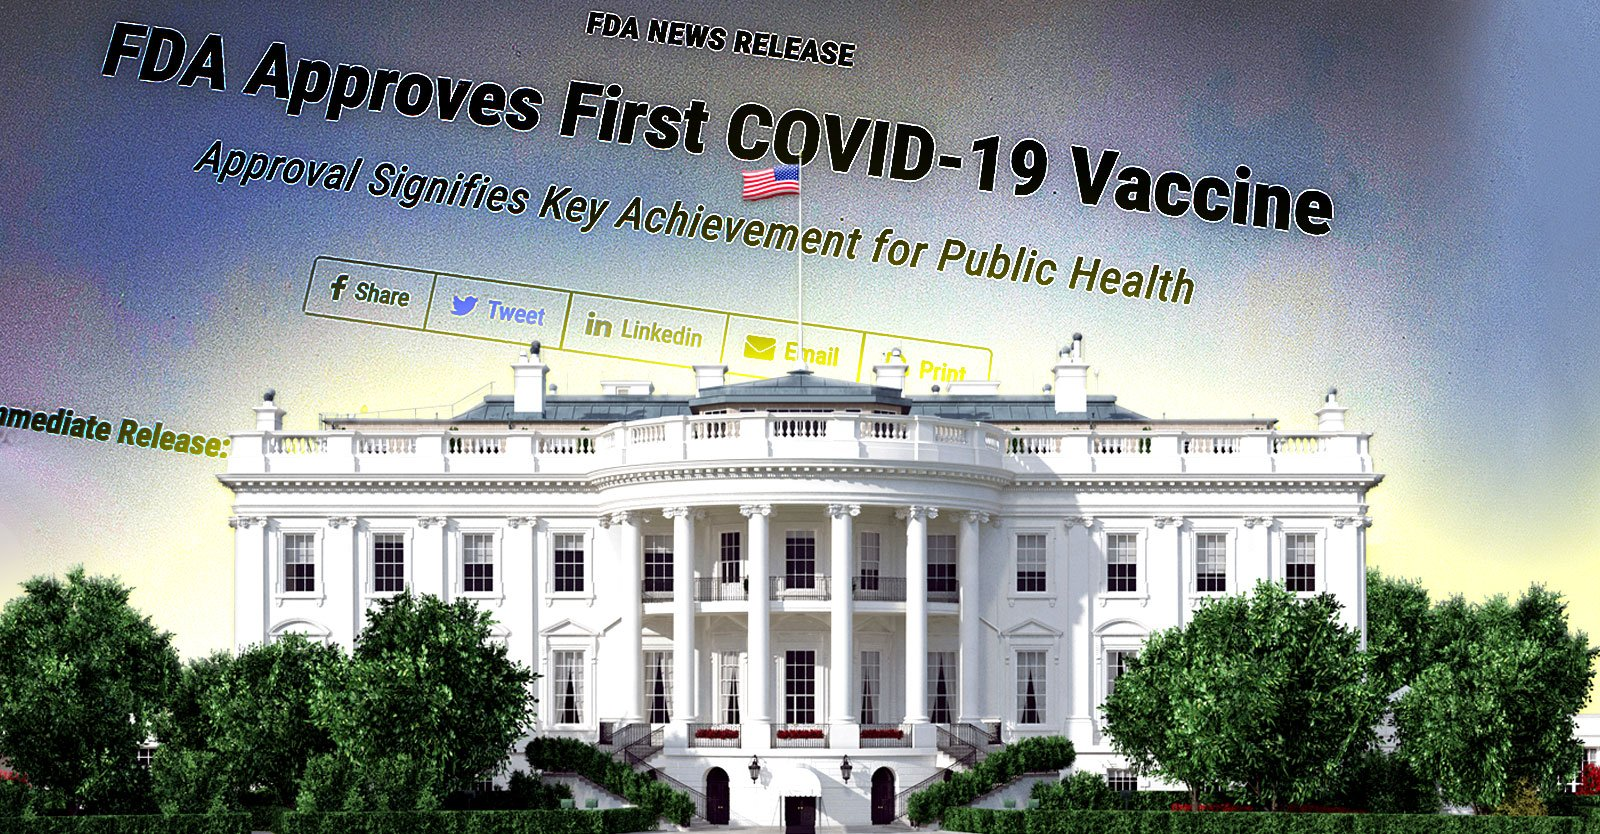 The Biden administration pressured the FDA to “change its procedures, cut corners, and lower agency standards,” to approve Pfizer’s COVID-19 vaccines and authorize boosters, according to a congressional report released earlier this week.